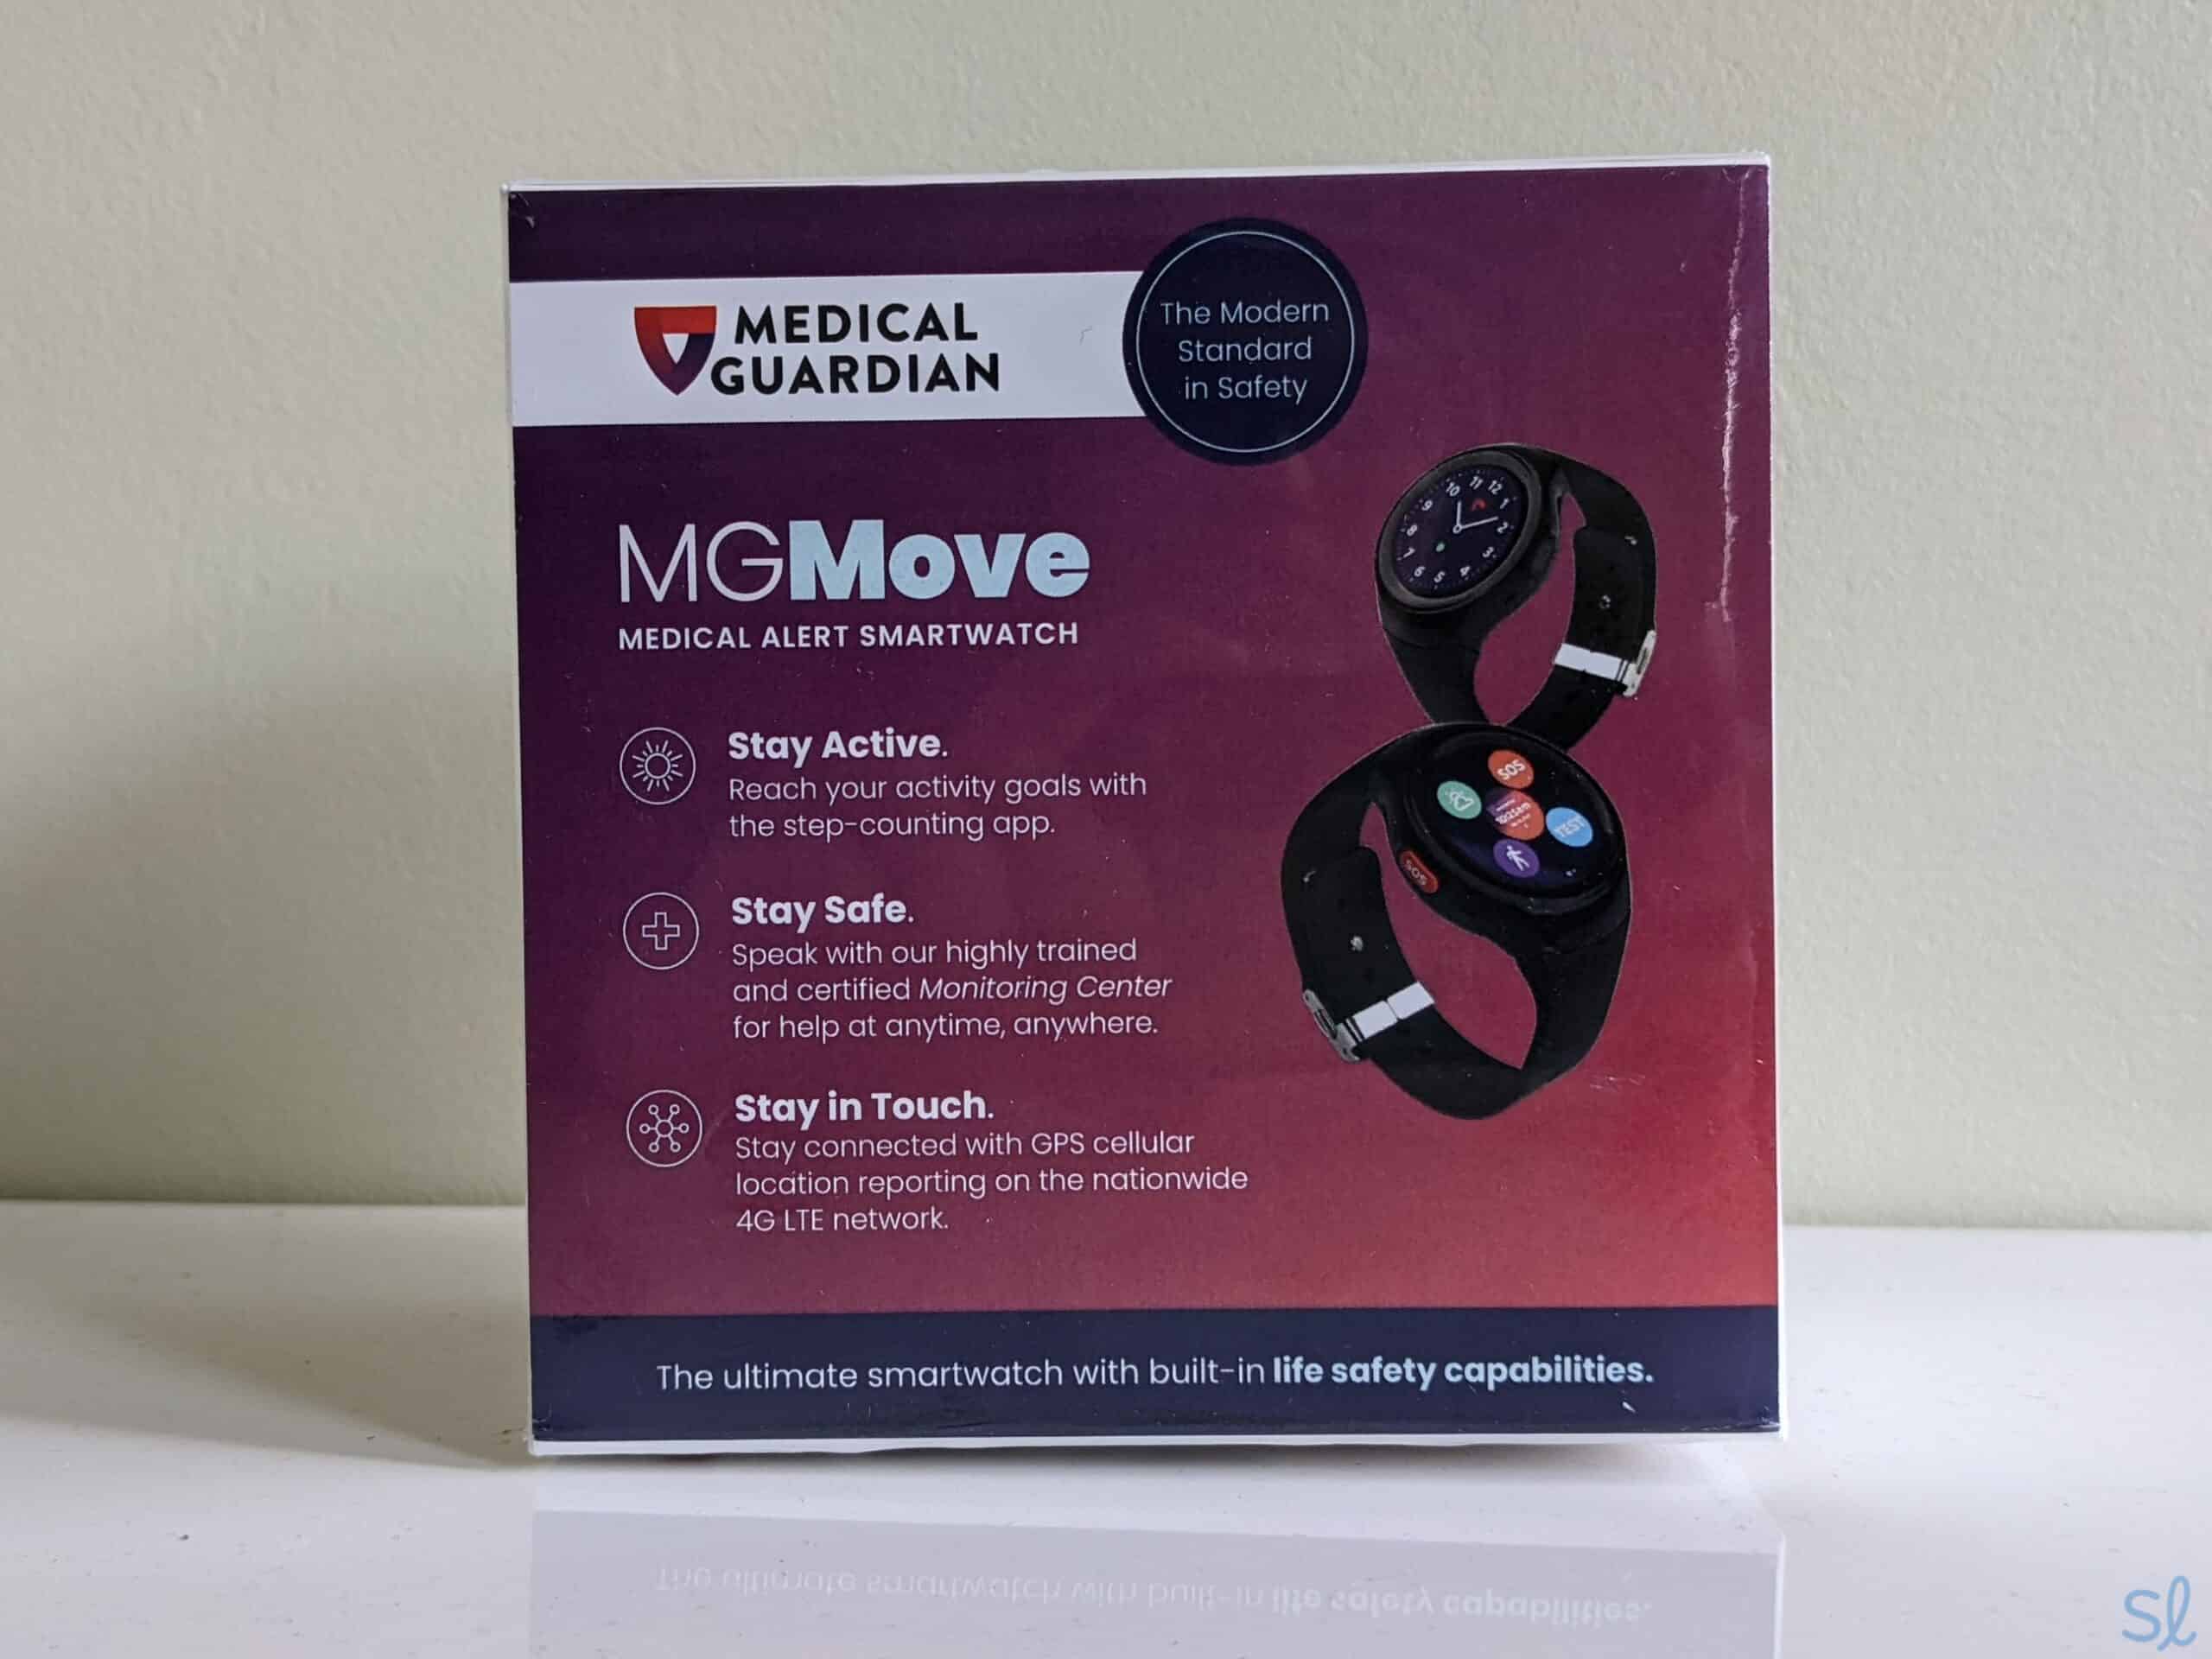 MGMove's packaging